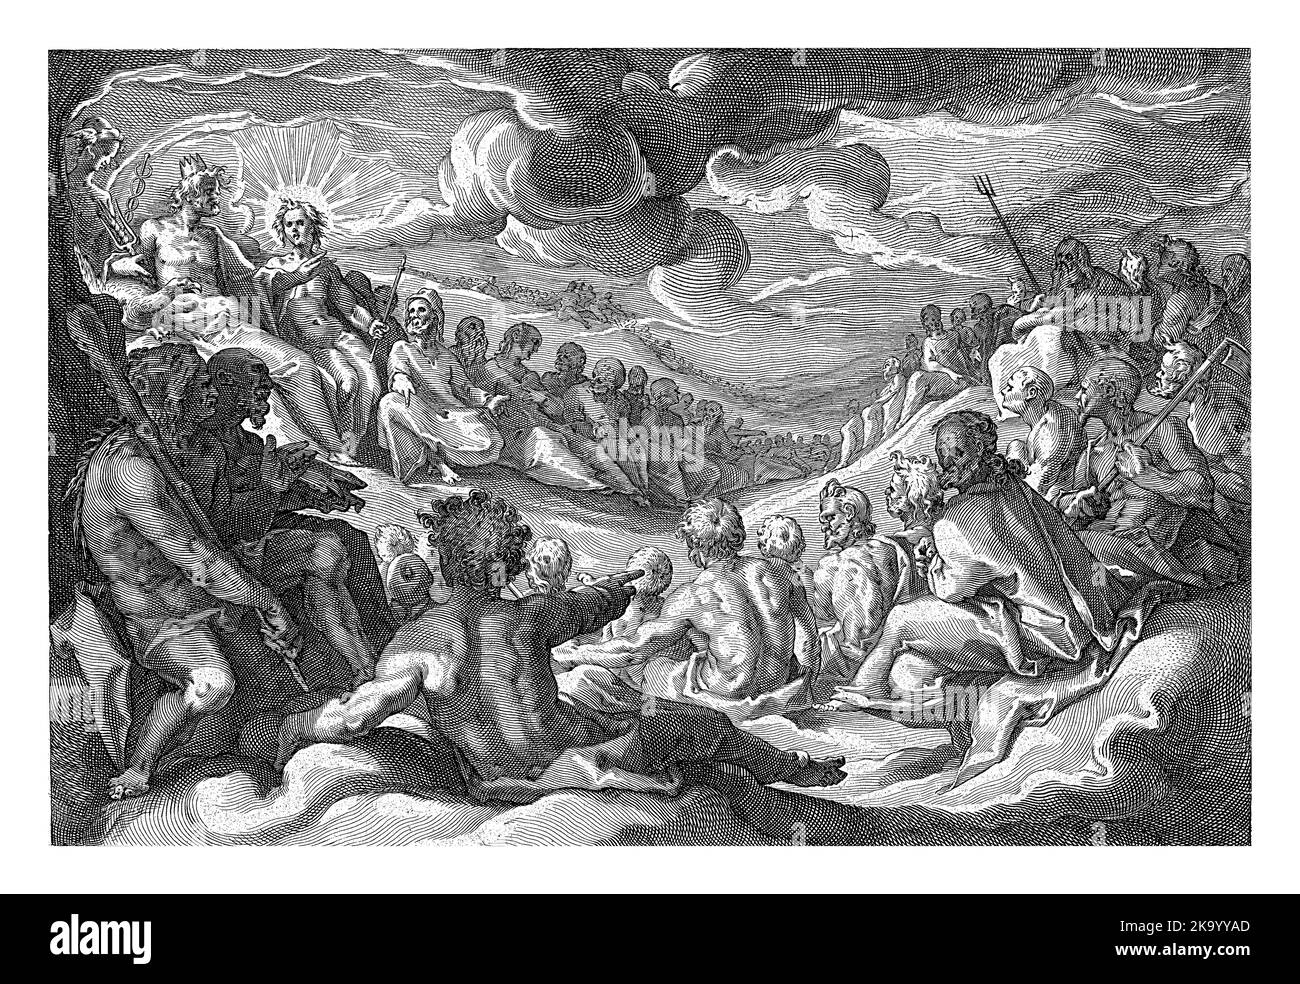 Jupiter summons the assembly of the gods to take measures against the sins on earth. The gods have gathered at Jupiter, rear left. Stock Photo